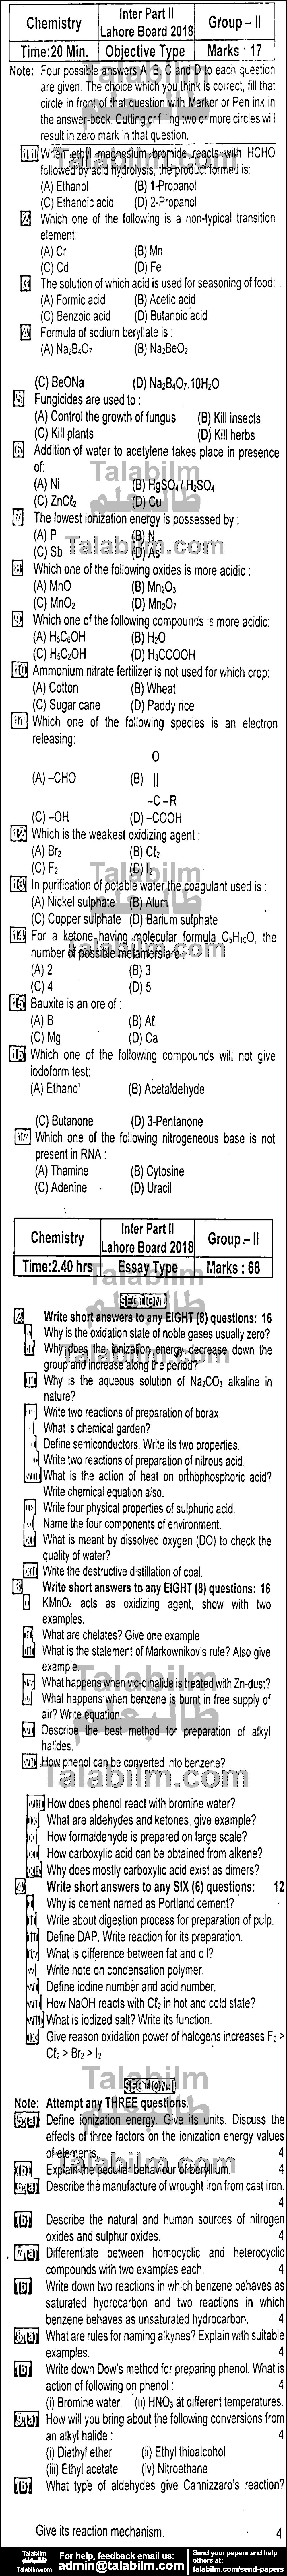 Chemistry 0 past paper for Group-II 2018